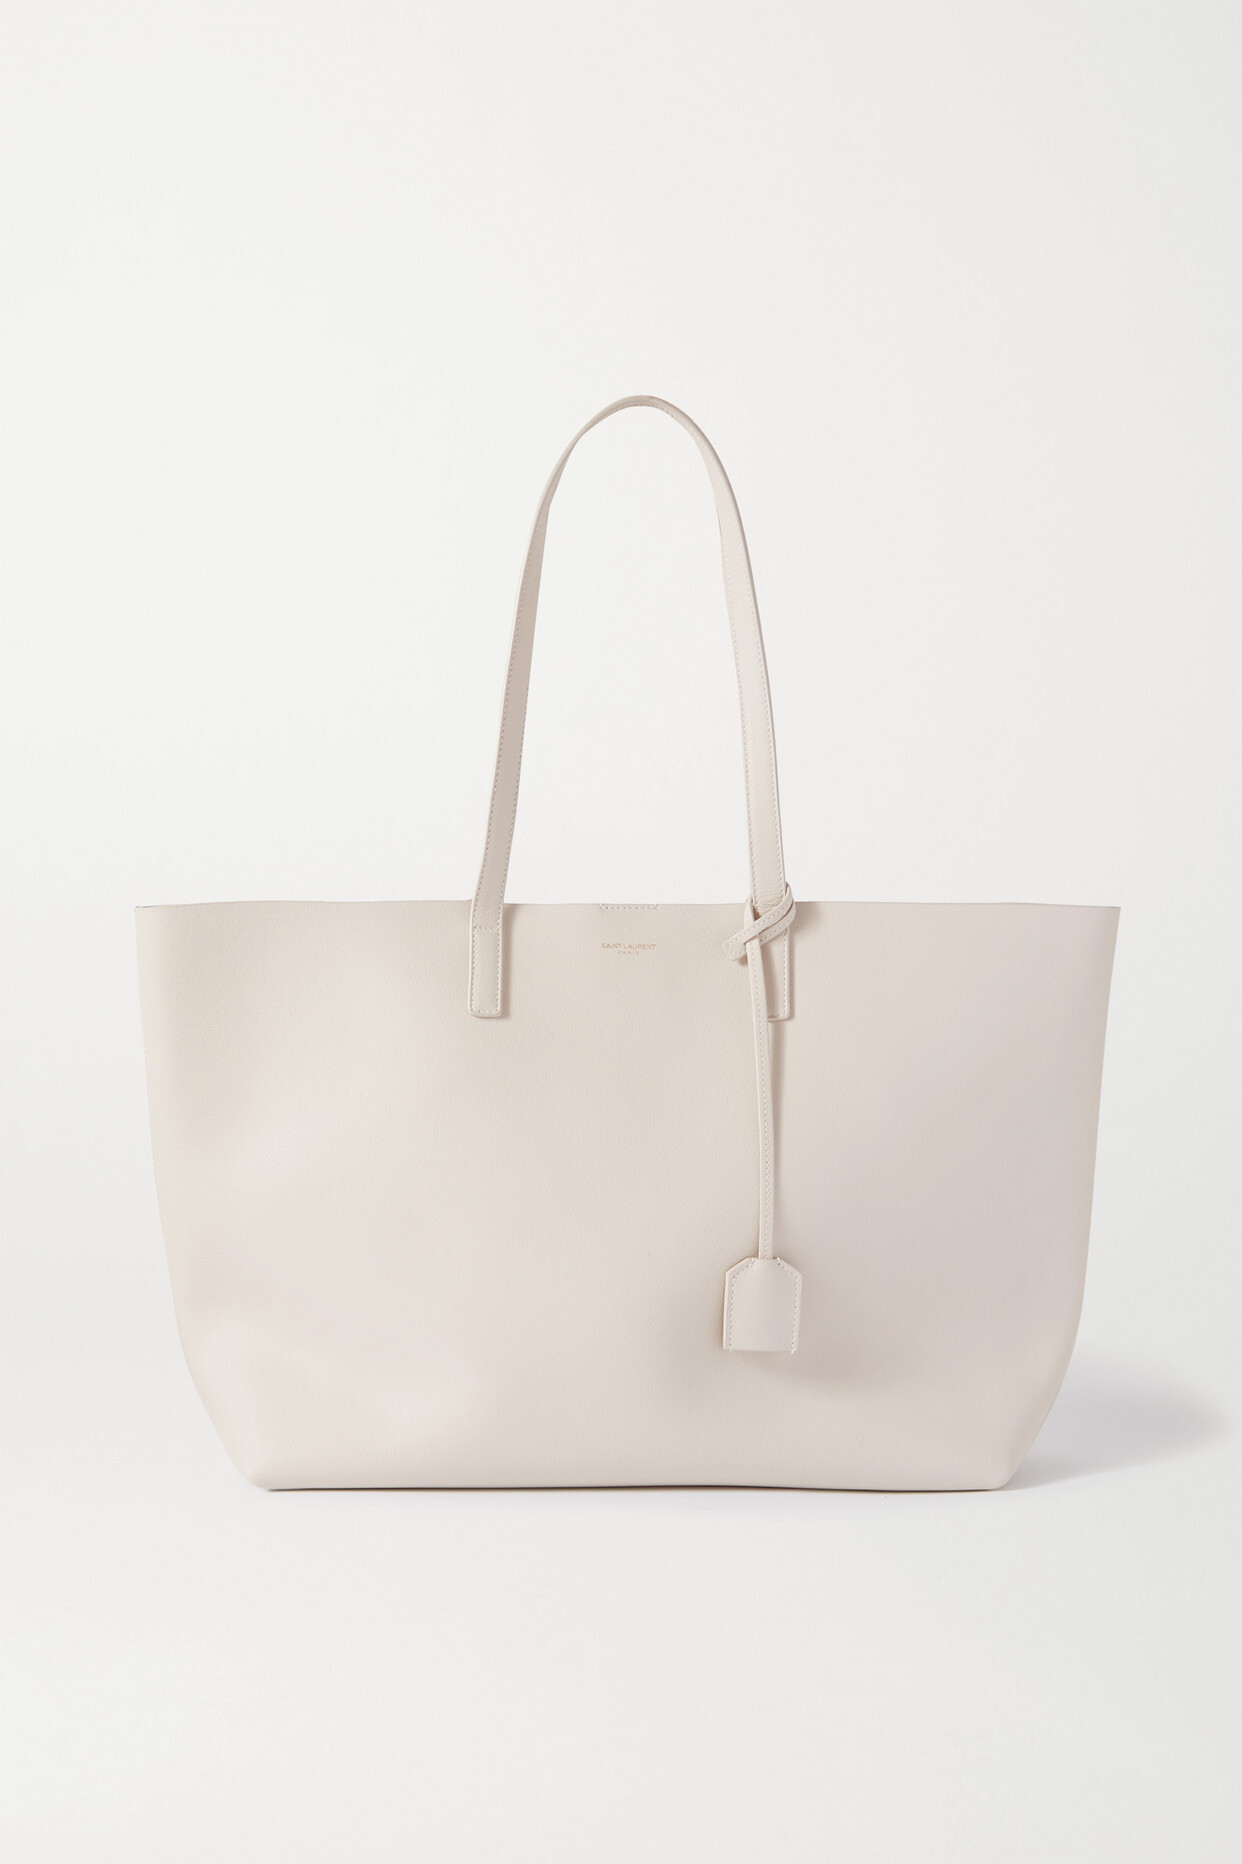 SAINT LAURENT - Leather Tote - Off-white